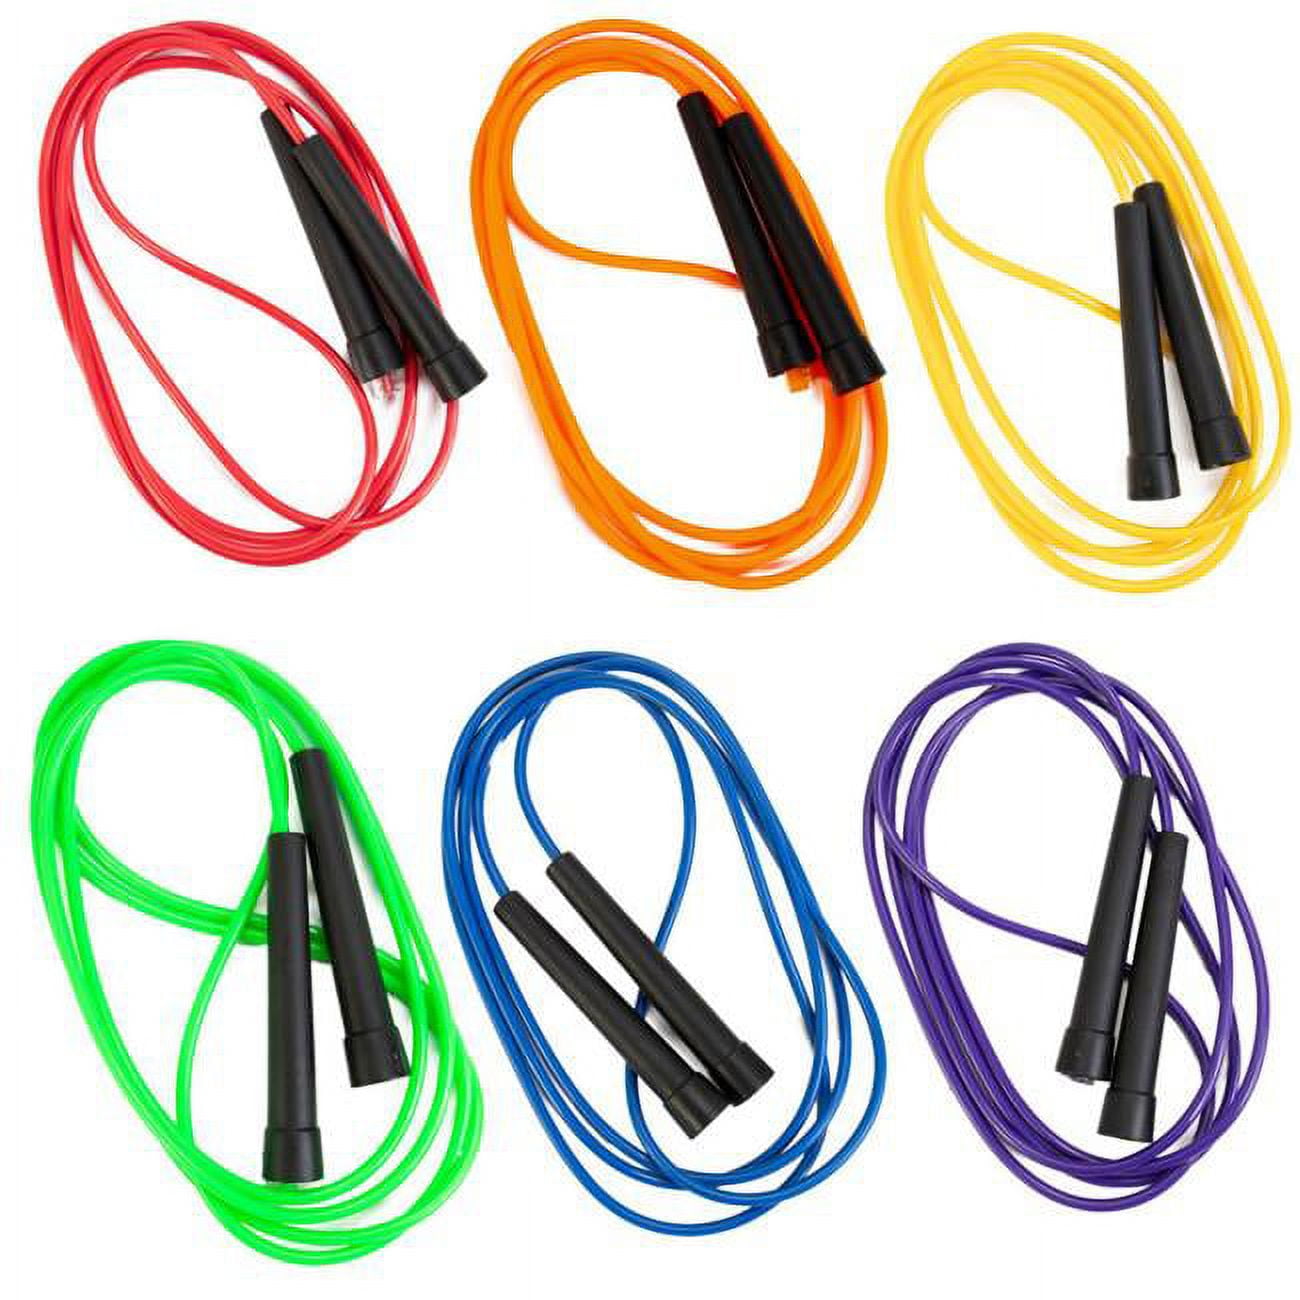 Picture of Brybelly SJMP-301 8 ft. PVC Jump Ropes, Assorted Colors - Pack of 6